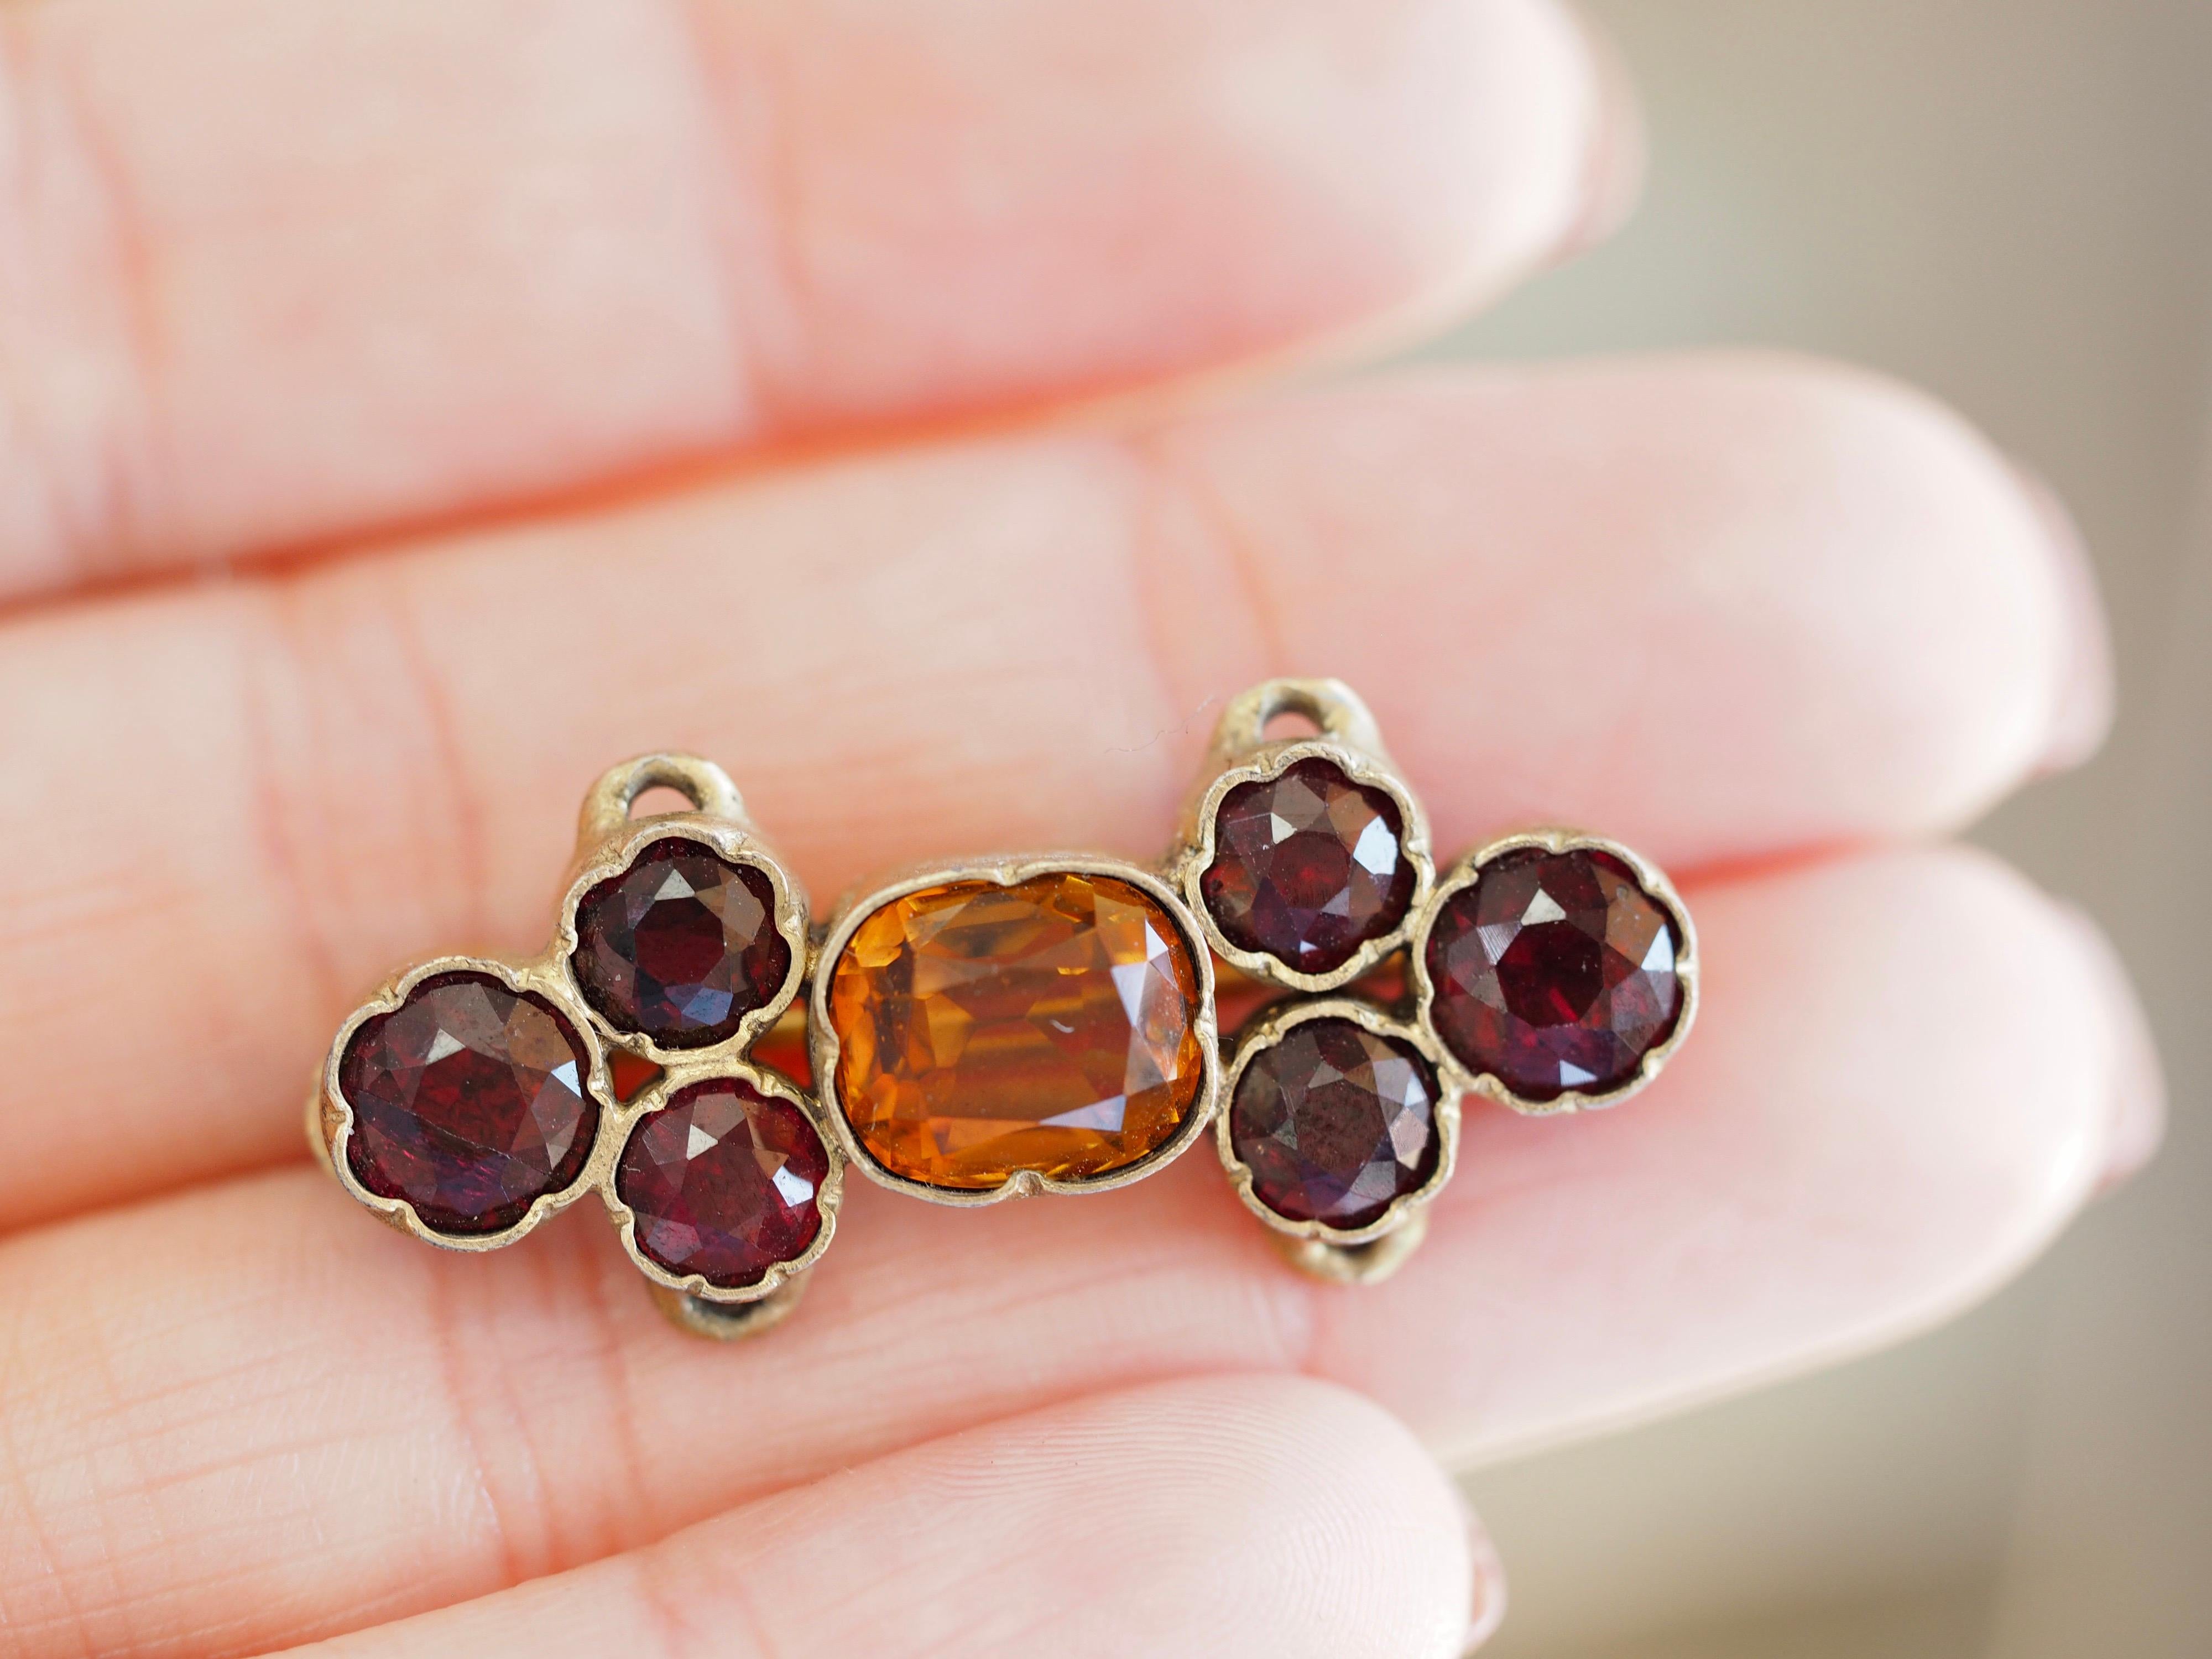 This beautiful Retro brooch can also be converted into a sliding pendant through it's little loops on all 4 corners, so versatile! It boasts vibrant colors in a lovely oval shaped natural citrine stone nestled in the middle of 6 round natural